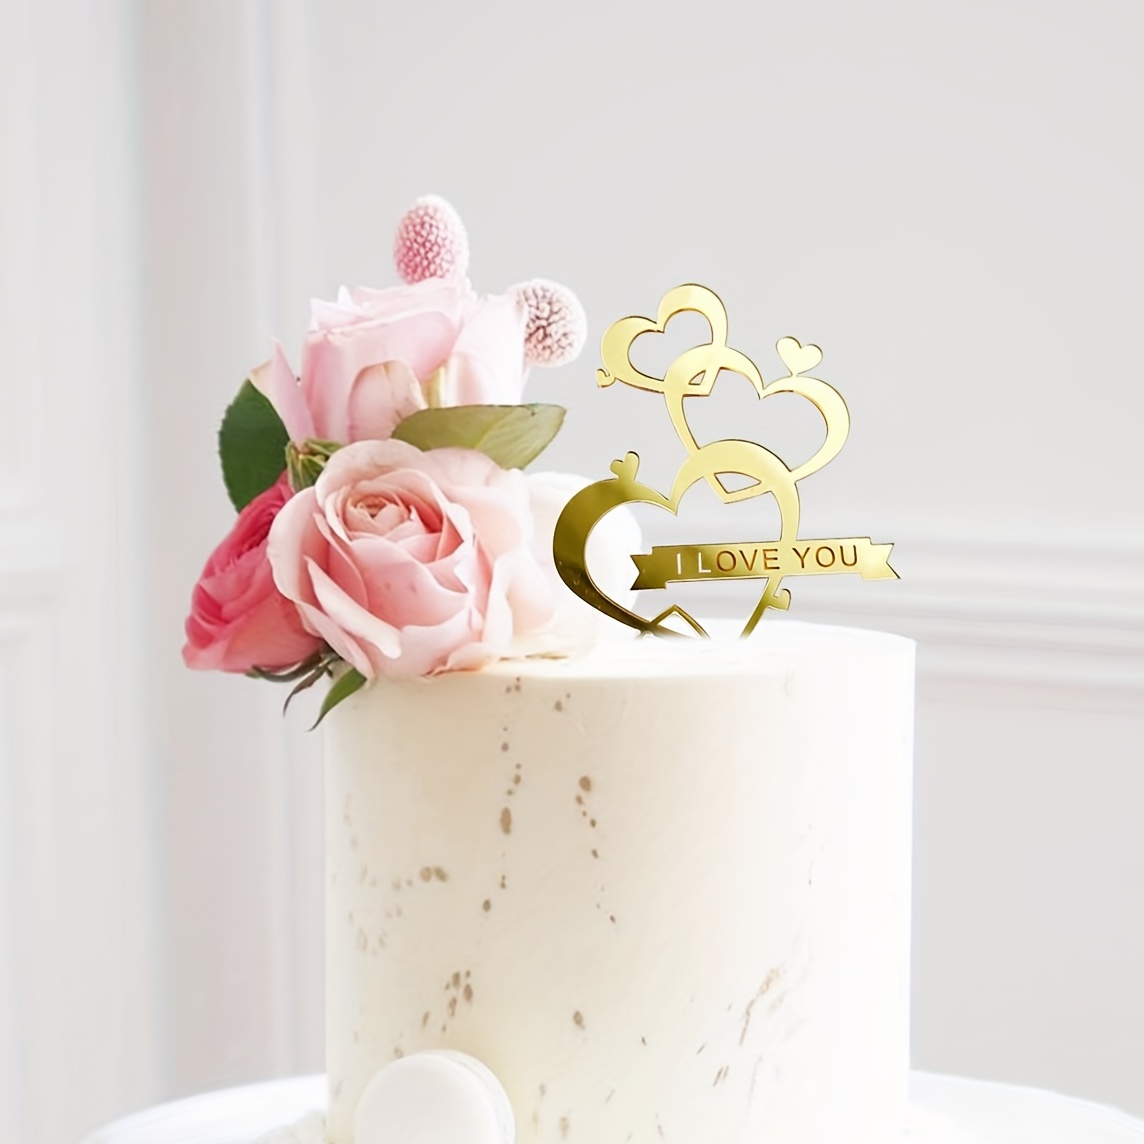 Mr & Mrs Gold Metal Cake Topper | Party World